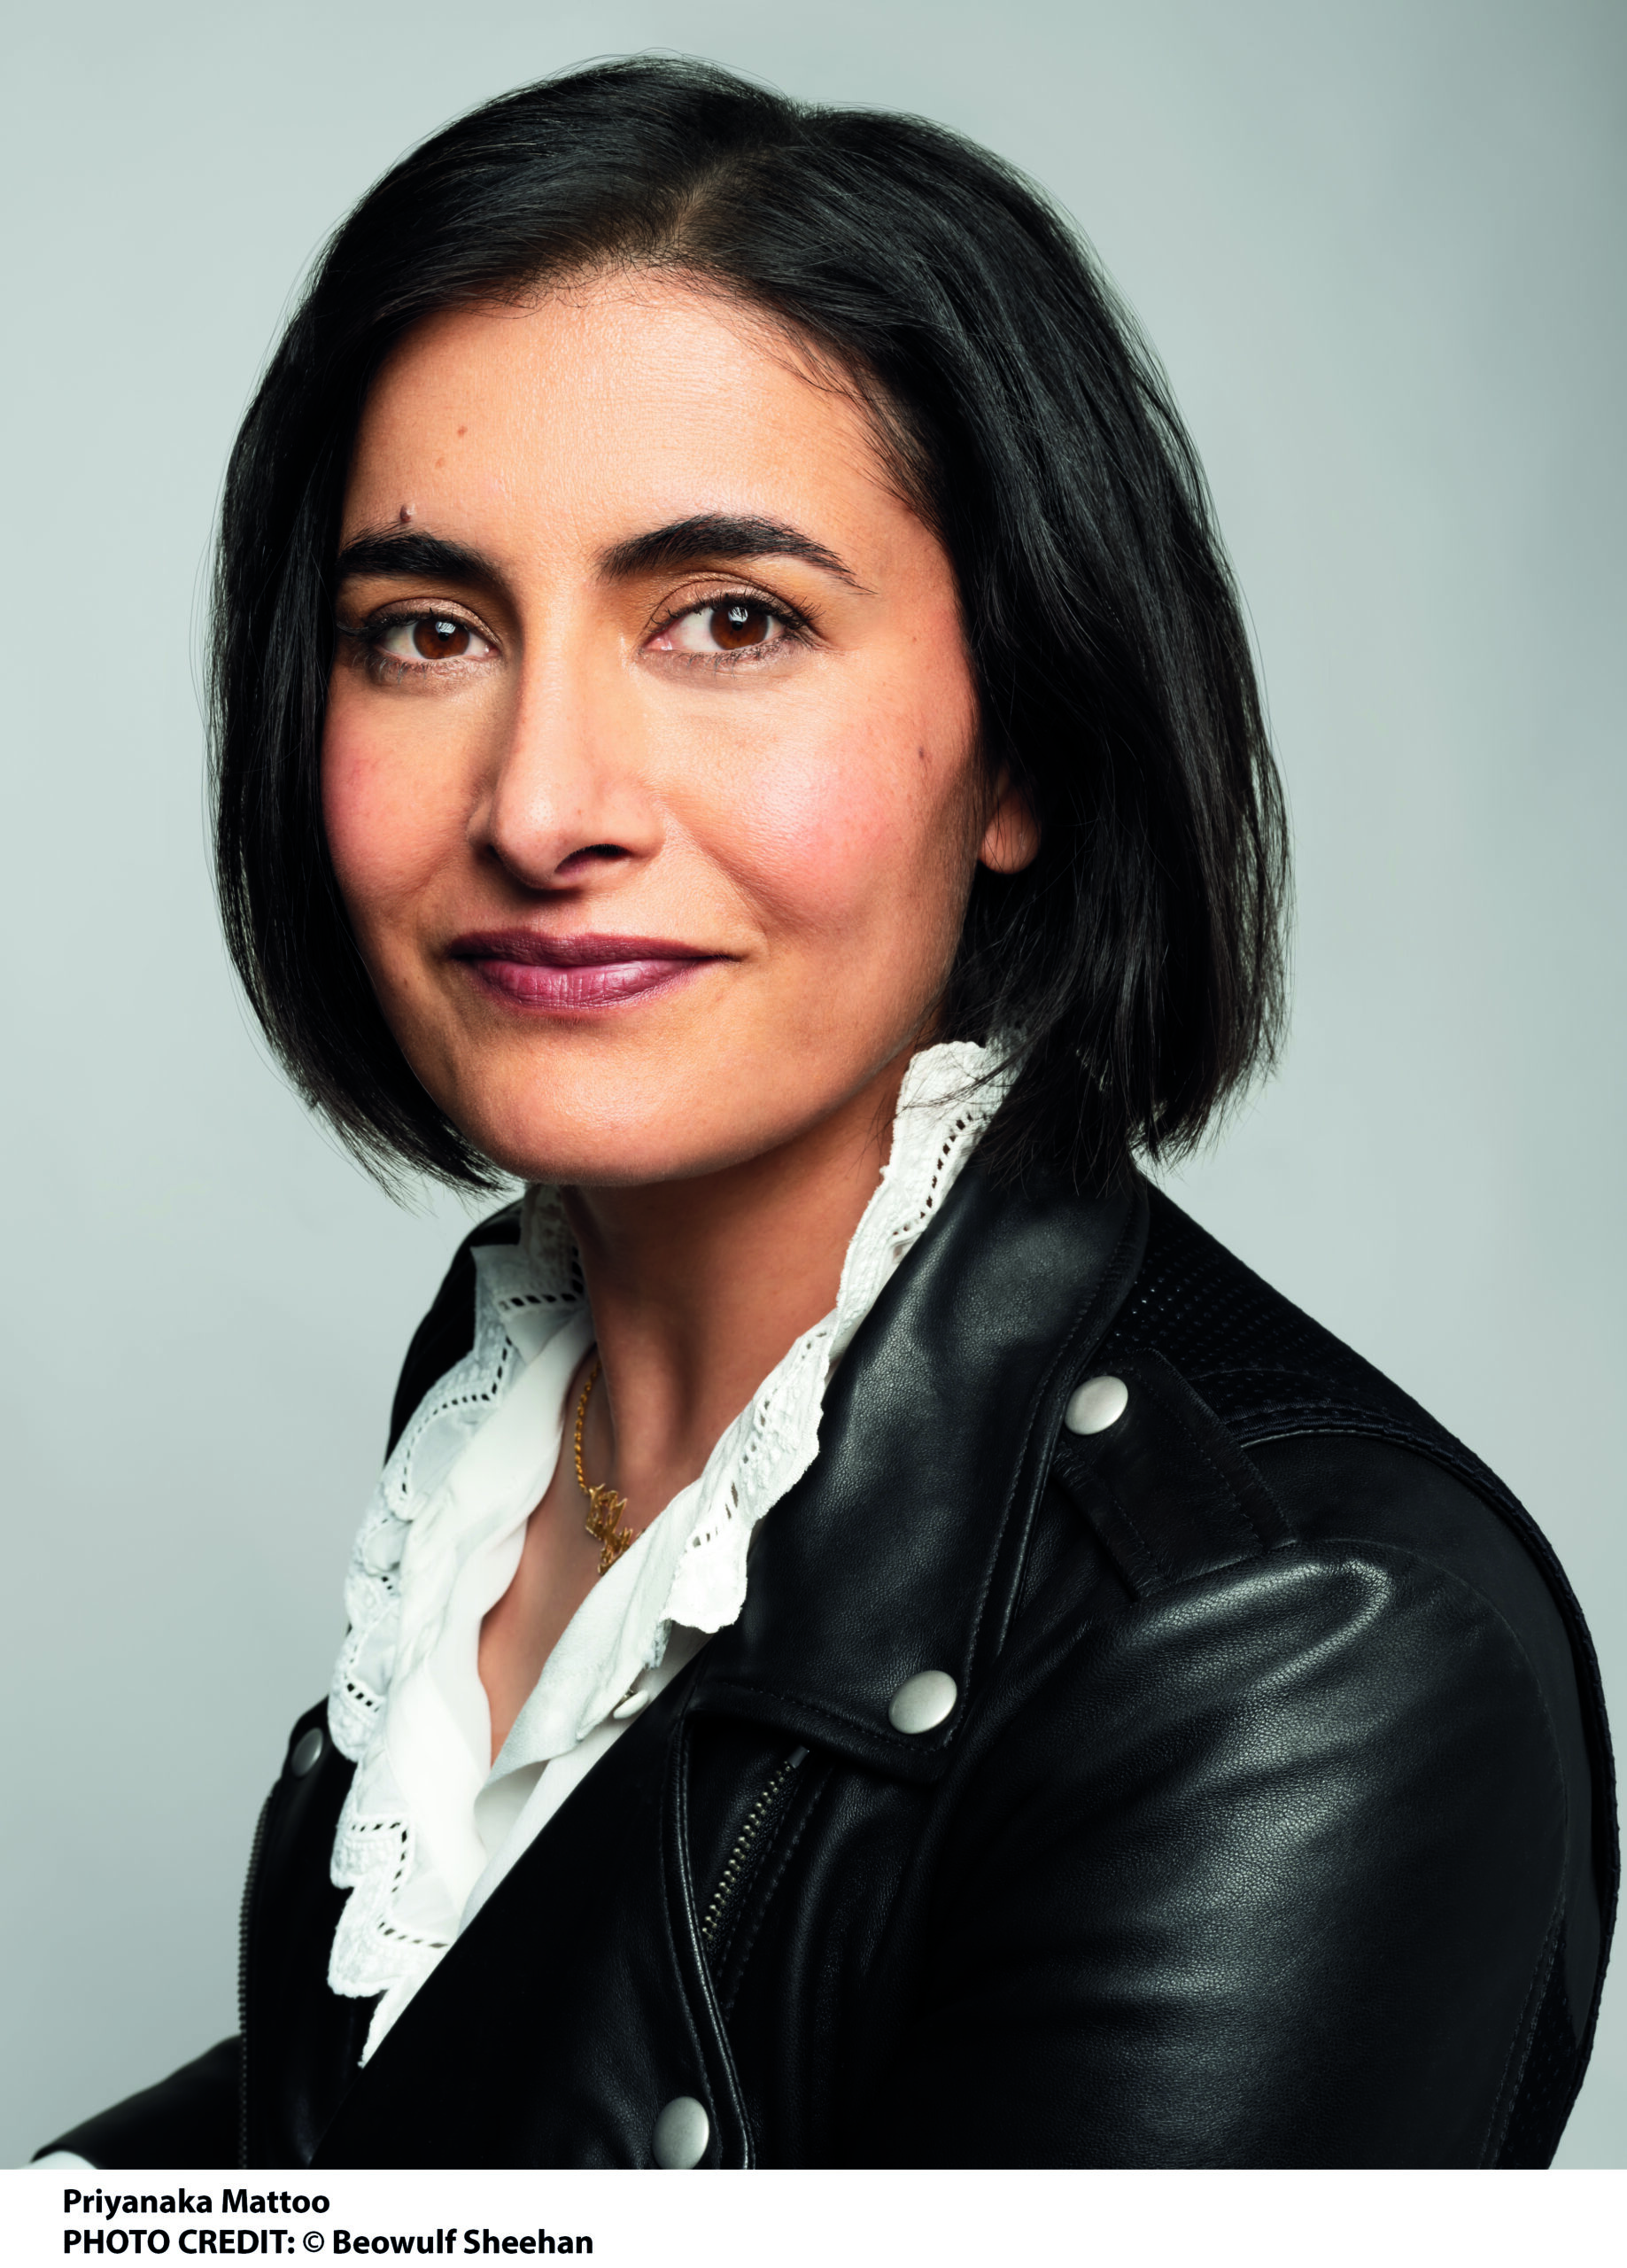 Priyanka Mattoo is the author of Bird Milk & Mosquito Bones, an upcoming memoir from Knopf (June 18, 2024). 
She was formerly an agent at UTA and WME, as well as Jack Black’s partner at their production company, Electric Dynamite. Priyanka co-founded EARIOS, the women-led podcast network, and co-hosted its critically-acclaimed beauty/wellness podcast, Foxy Browns. 

Her writing has appeared in The New Yorker, The New York Times, Vulture, and The Hairpin, and her film work in festivals from Sundance to Cannes. She was raised in India, England, and Saudi Arabia before moving to the U.S. in high school, and holds degrees in Italian and Law from the University of Michigan. 

Priyanka is the recipient of a MacDowell fellowship, and her piece How to Extract a Mother’s Rogan Josh Recipe Over Zoom was noted in Best American Food Writing. She lives in Los Angeles with her husband and kids.